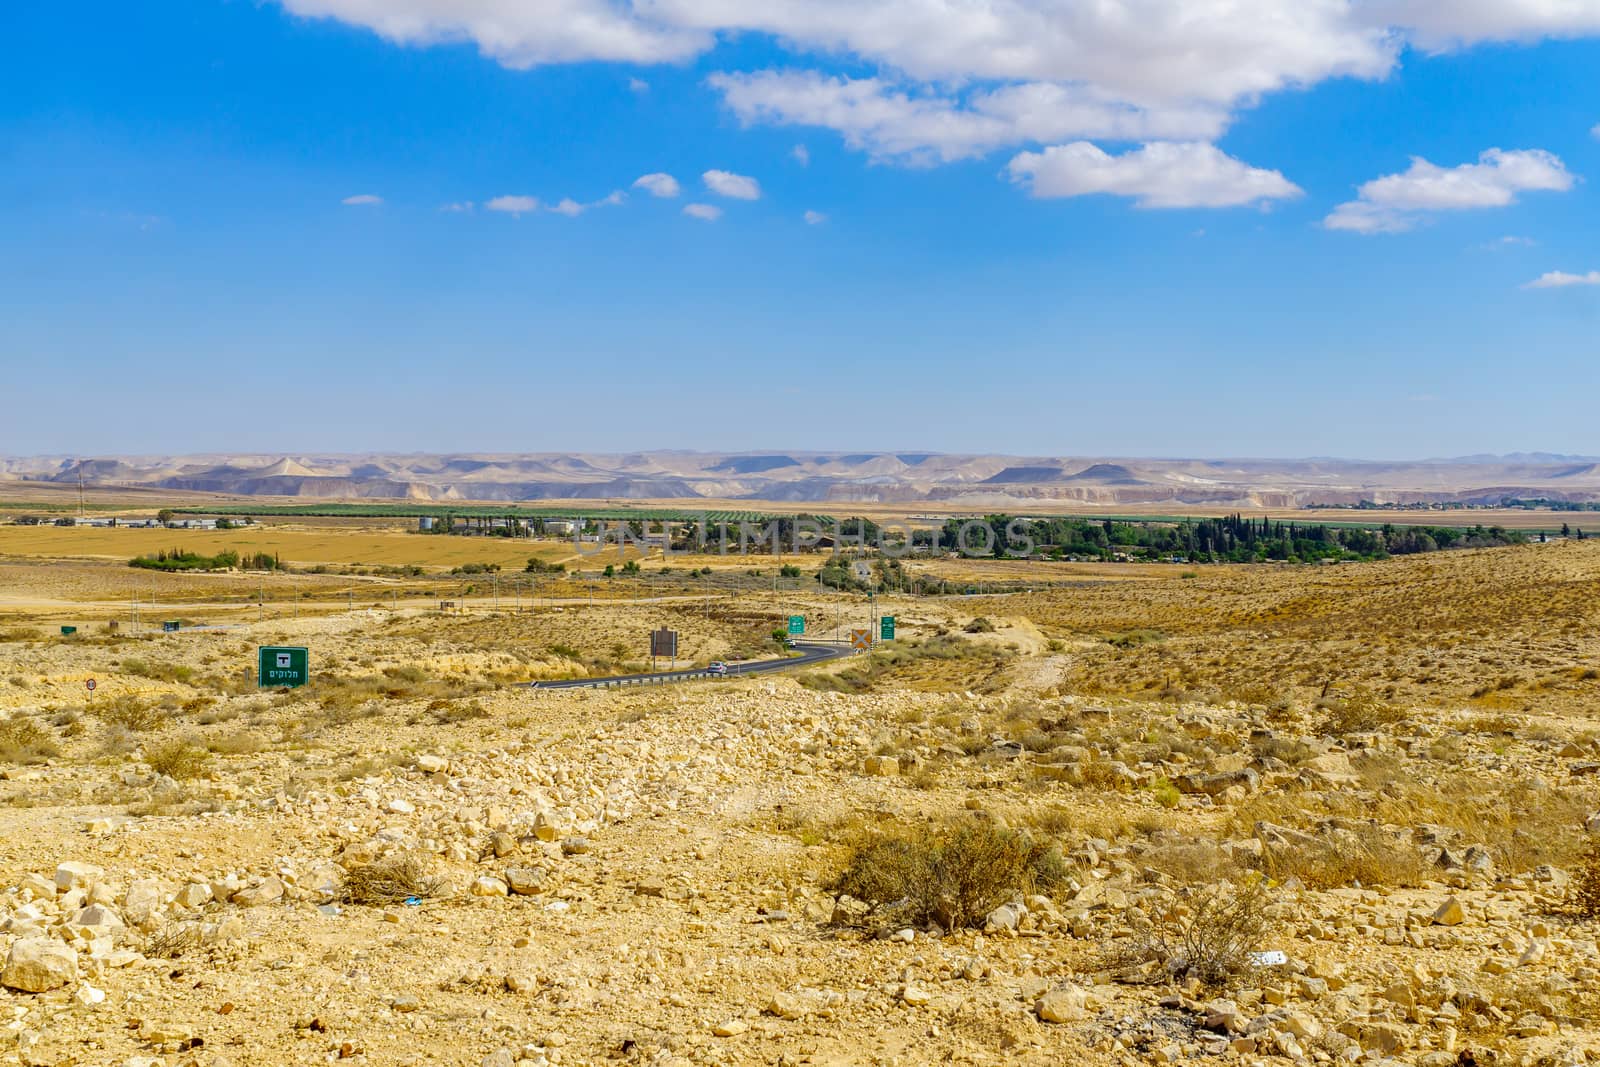 Negev Desert near Sde Boker, with trilingual road signs by RnDmS